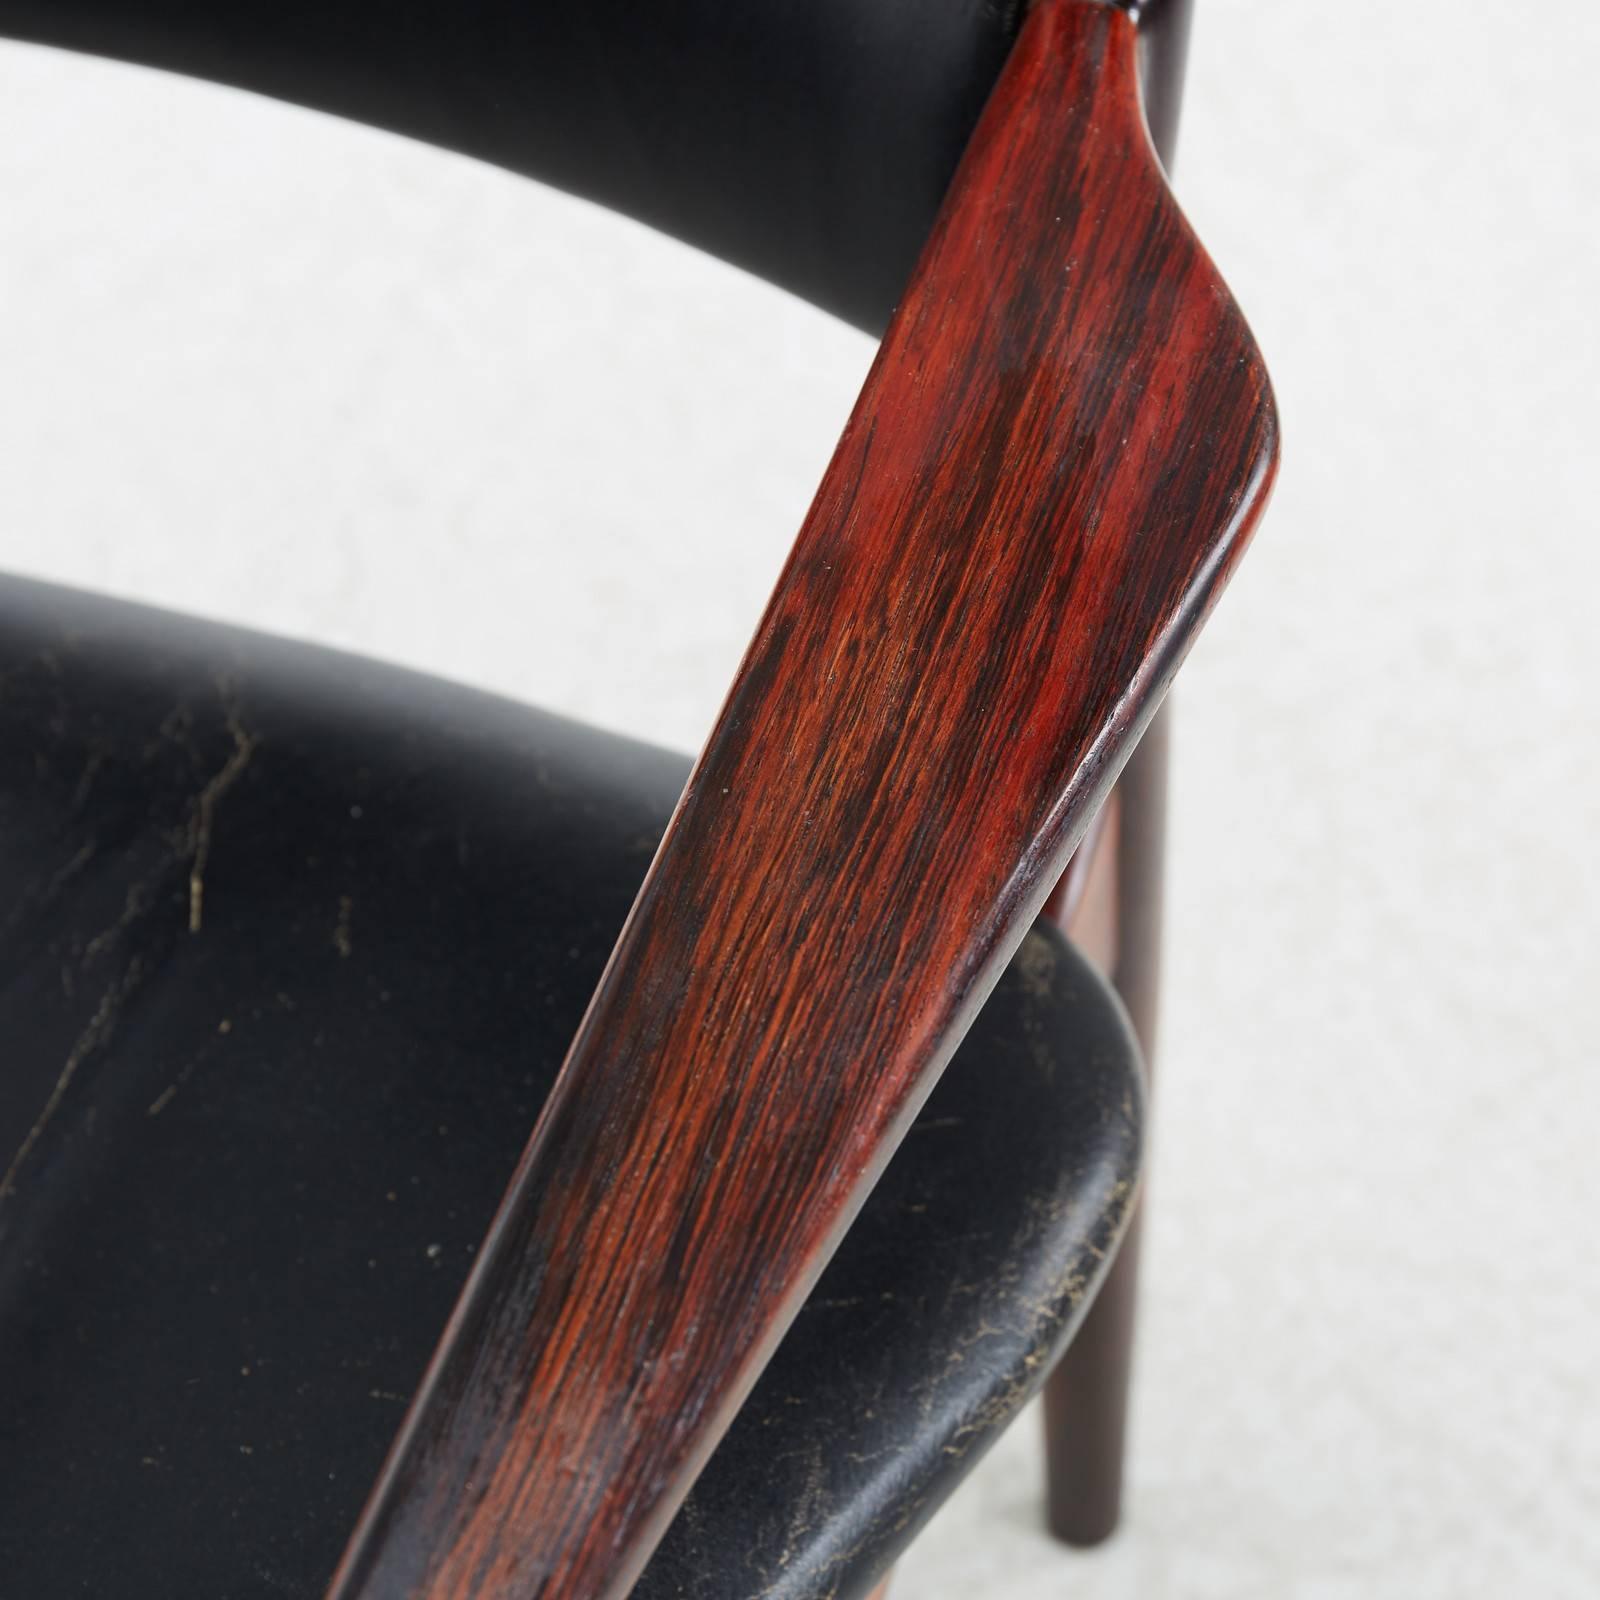 Woodwork 1960s Arne Vodder Rosewood Armchairs by Sibast Møbler Inc Re-Upholstery